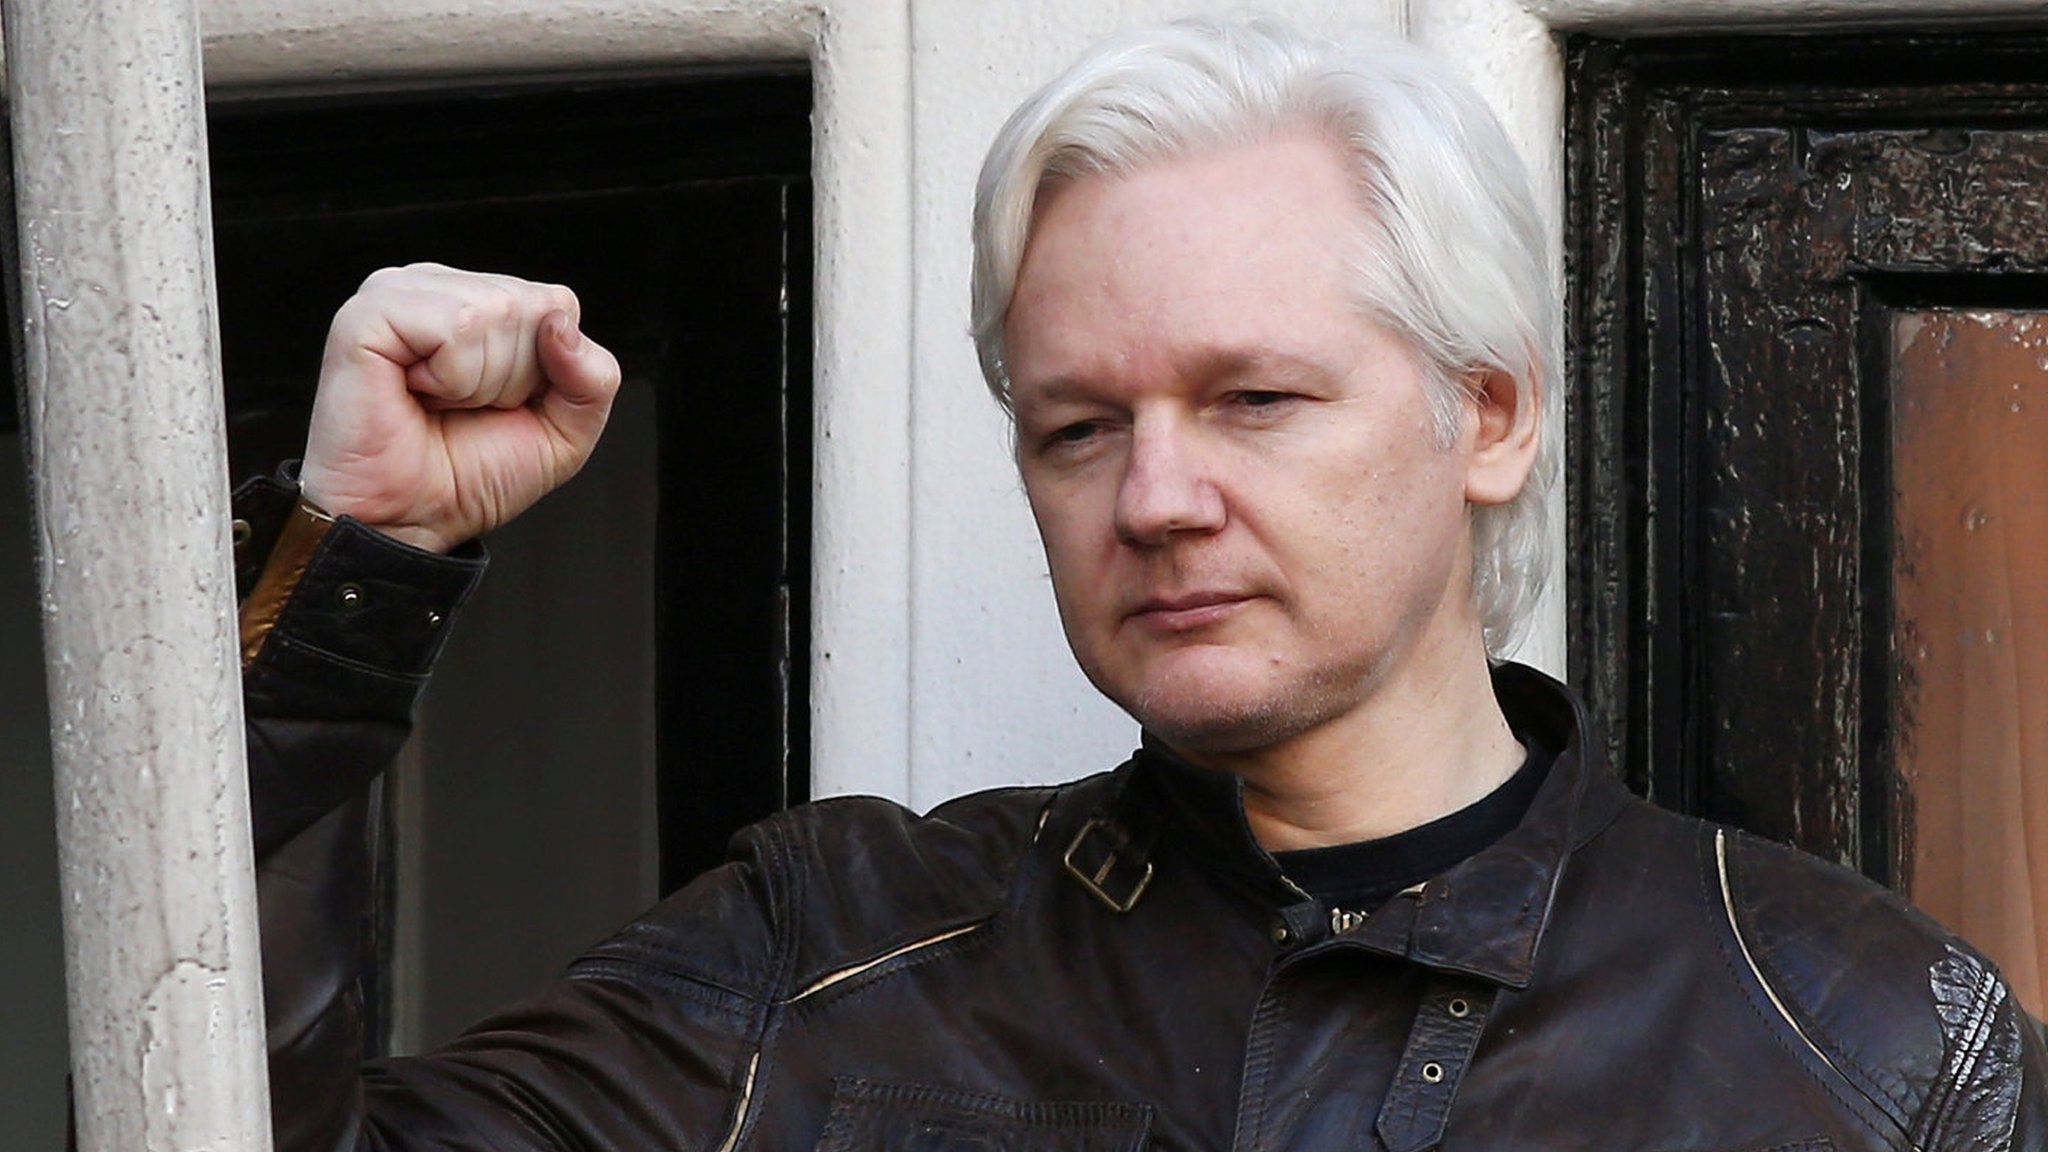 Julian Assange speaks on the balcony of the Embassy of Ecuador in London on May 19, 2017